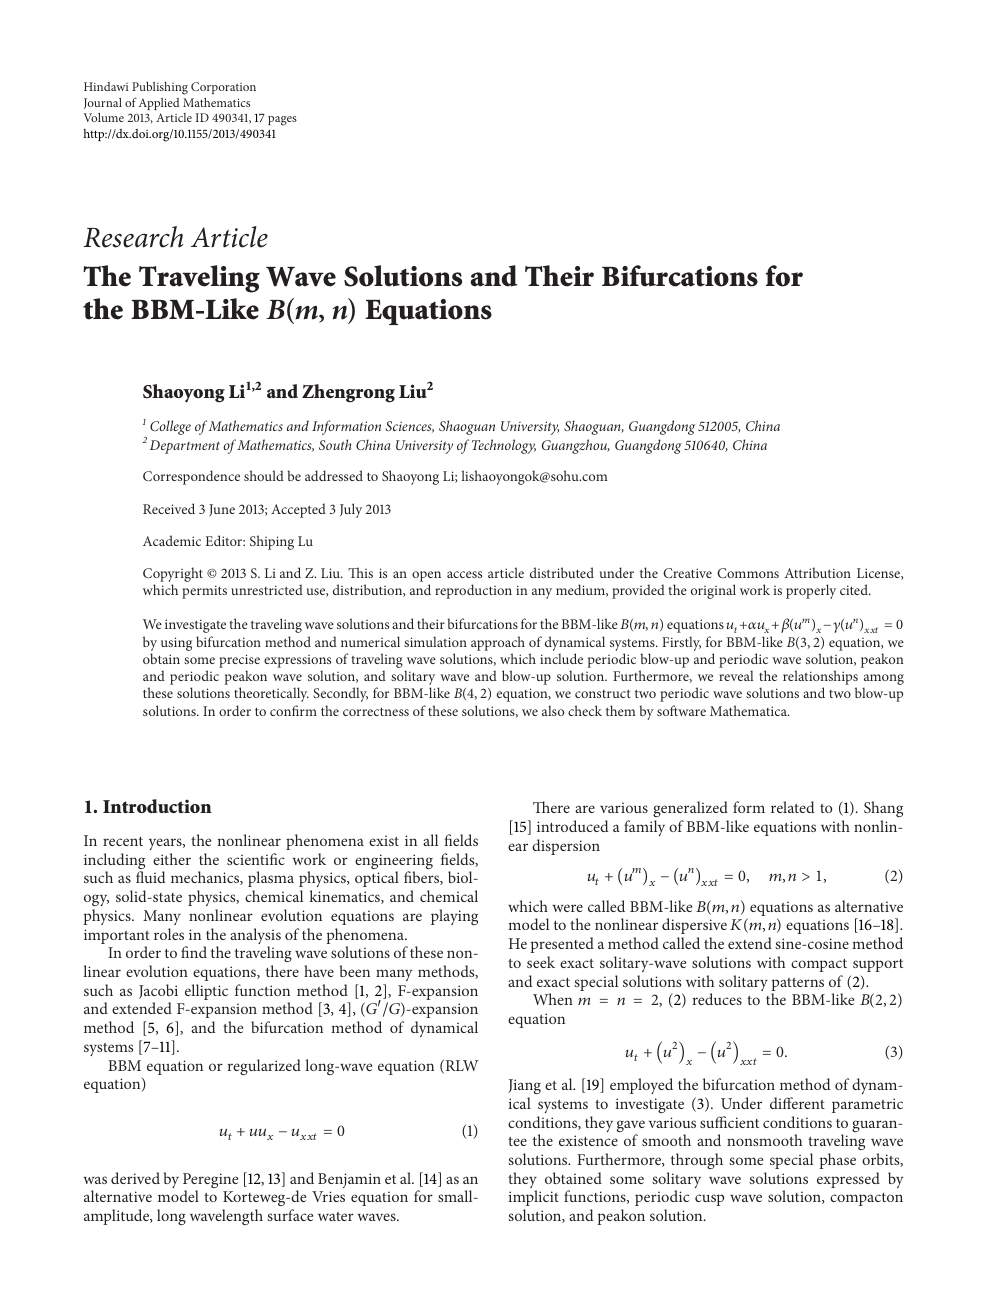 The Traveling Wave Solutions And Their Bifurcations For The m Like B M N Equations Topic Of Research Paper In Mathematics Download Scholarly Article Pdf And Read For Free